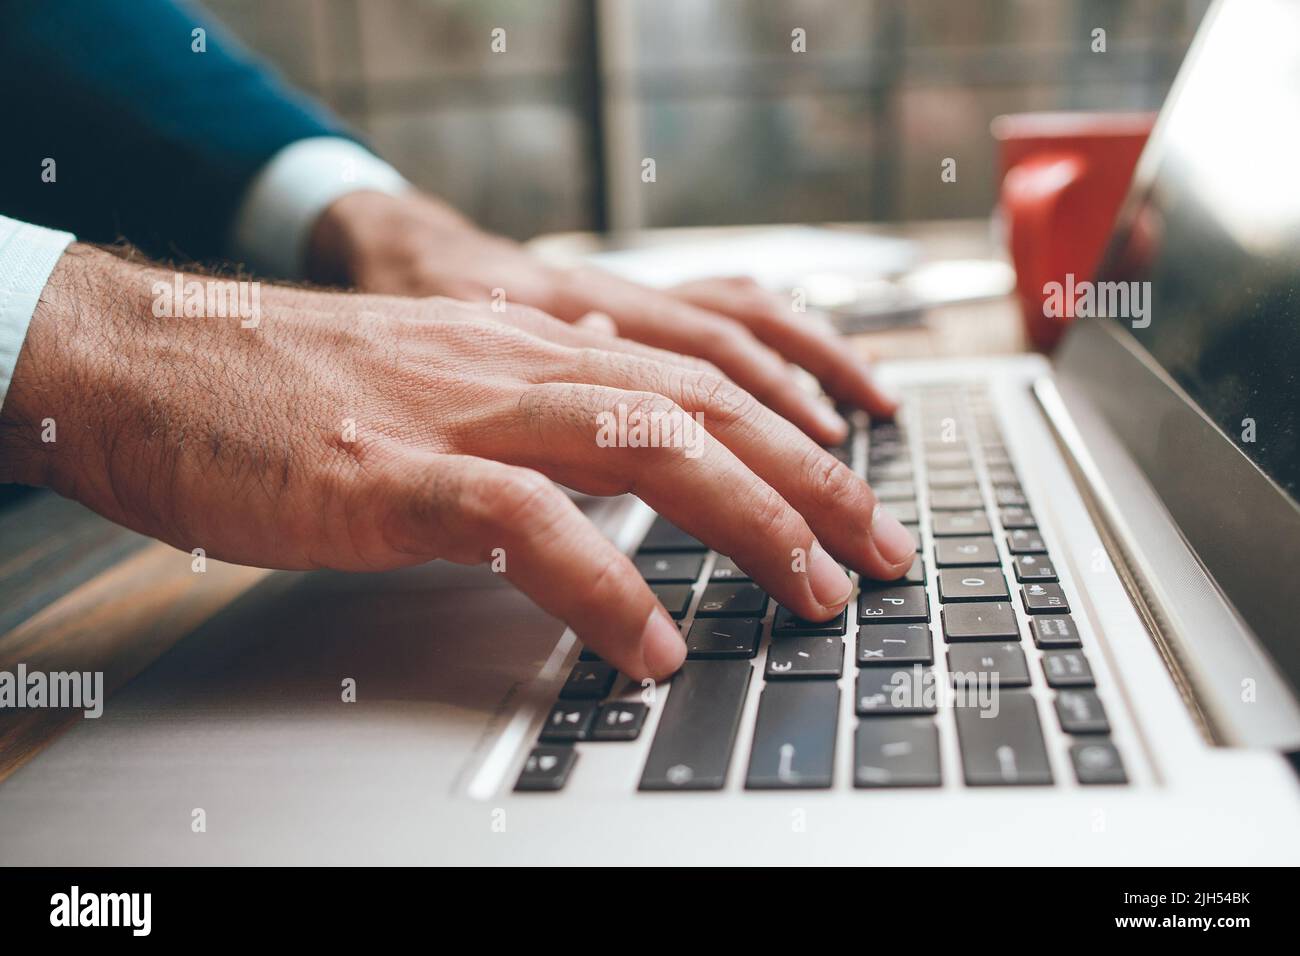 Opened laptop and male hands typing Stock Photo